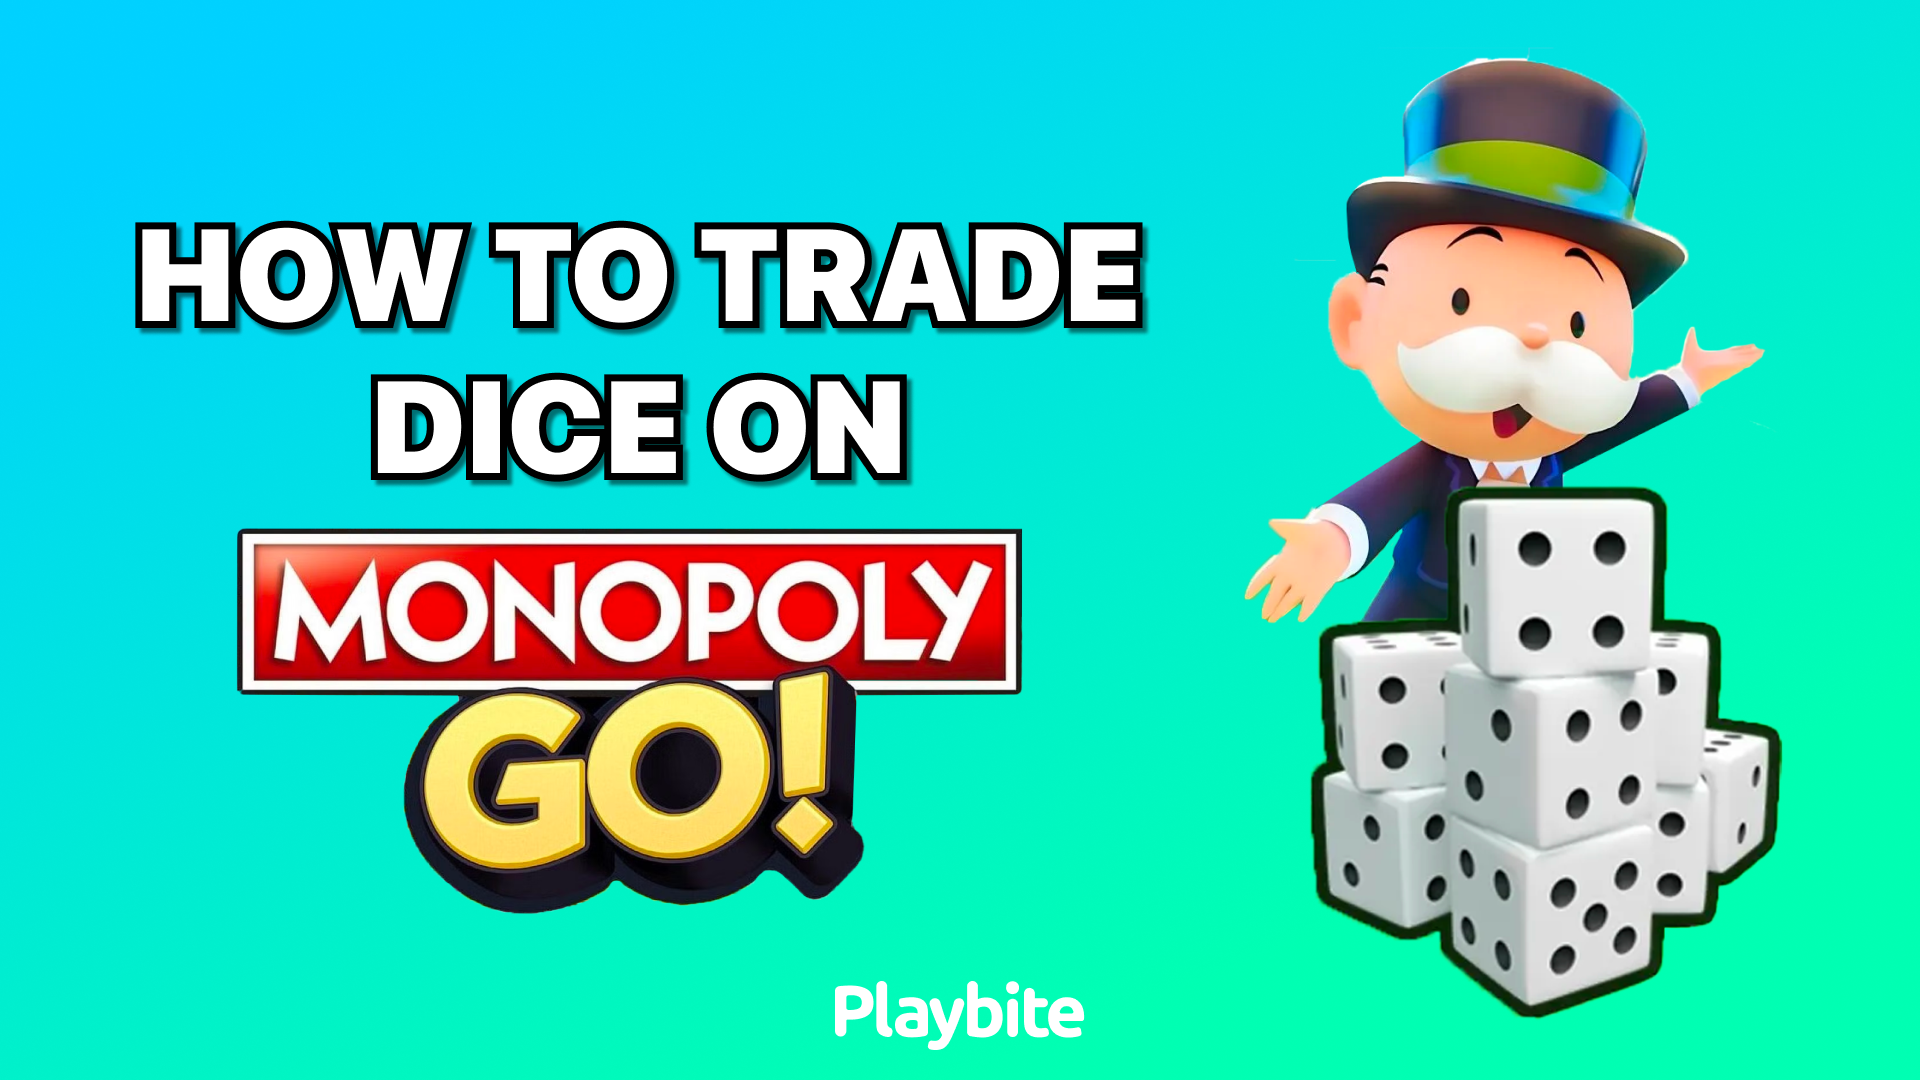 How To Trade Dice On Monopoly GO!